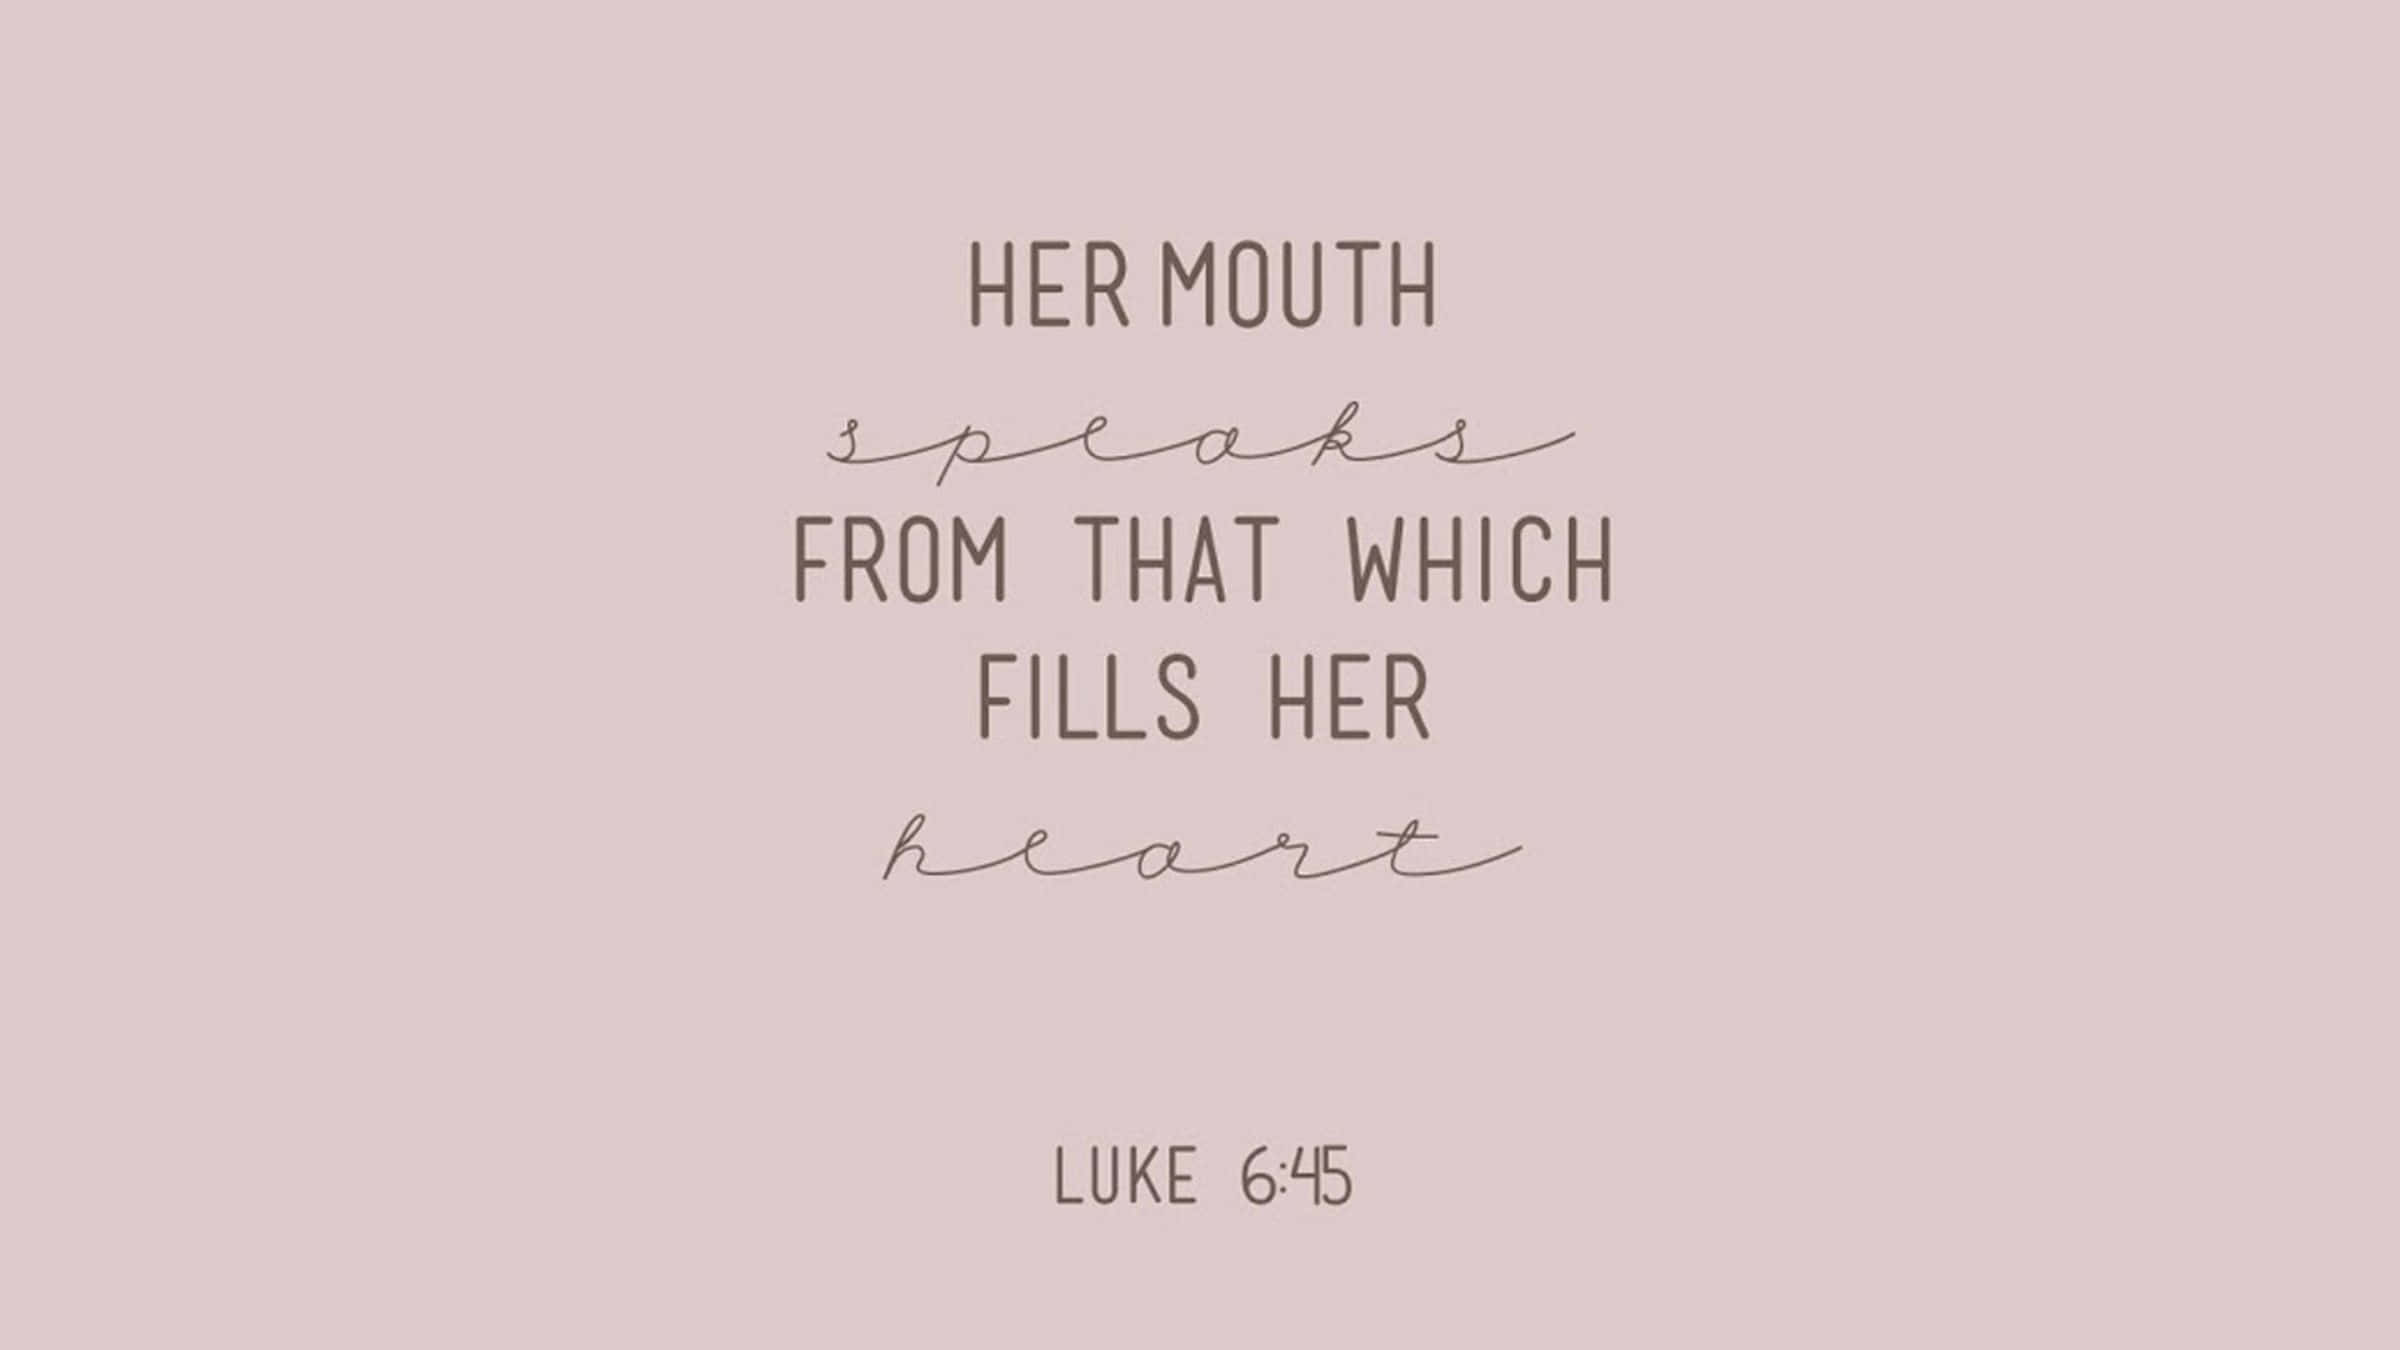 Biblical Verse of the Day Wallpaper